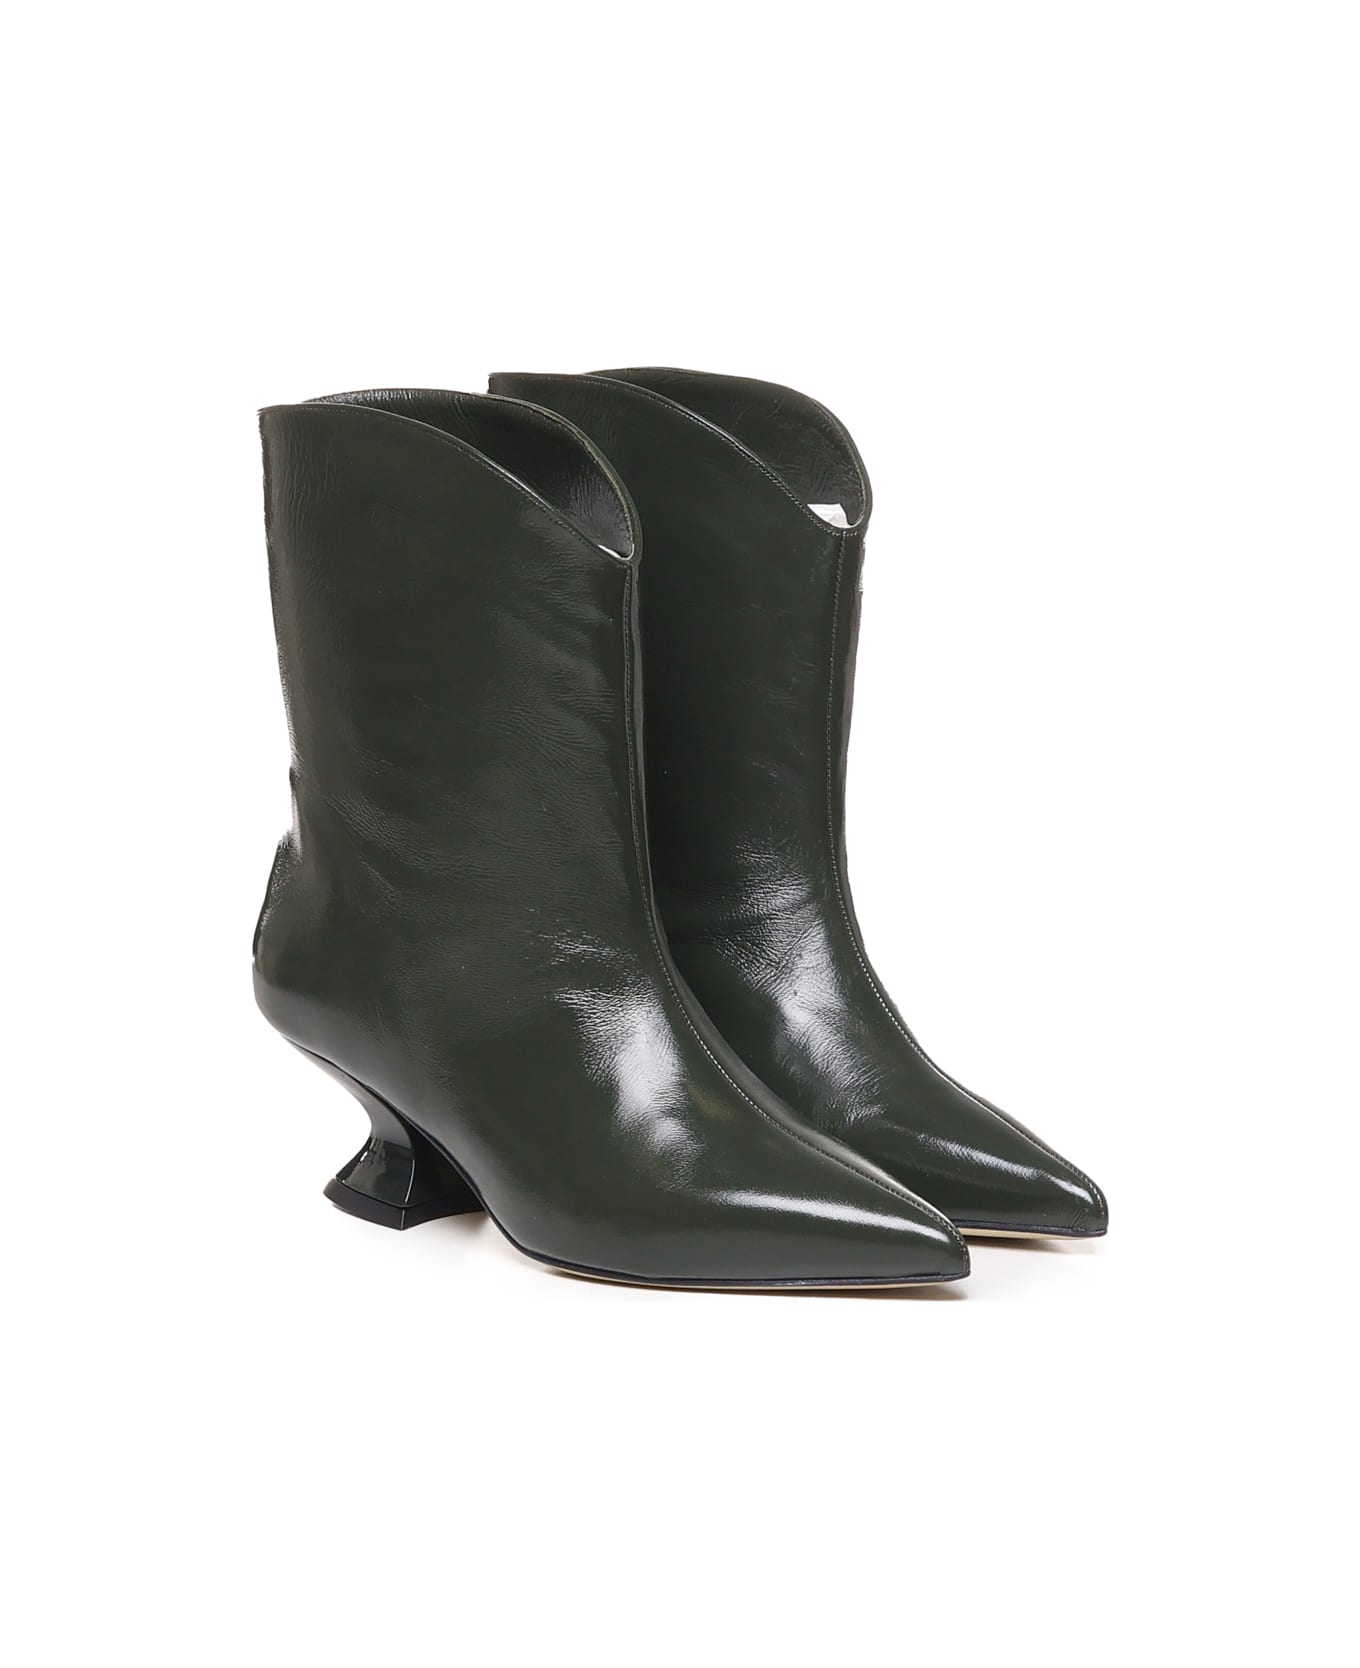 Alchimia Leather Ankle Boot With Low Heel - Green